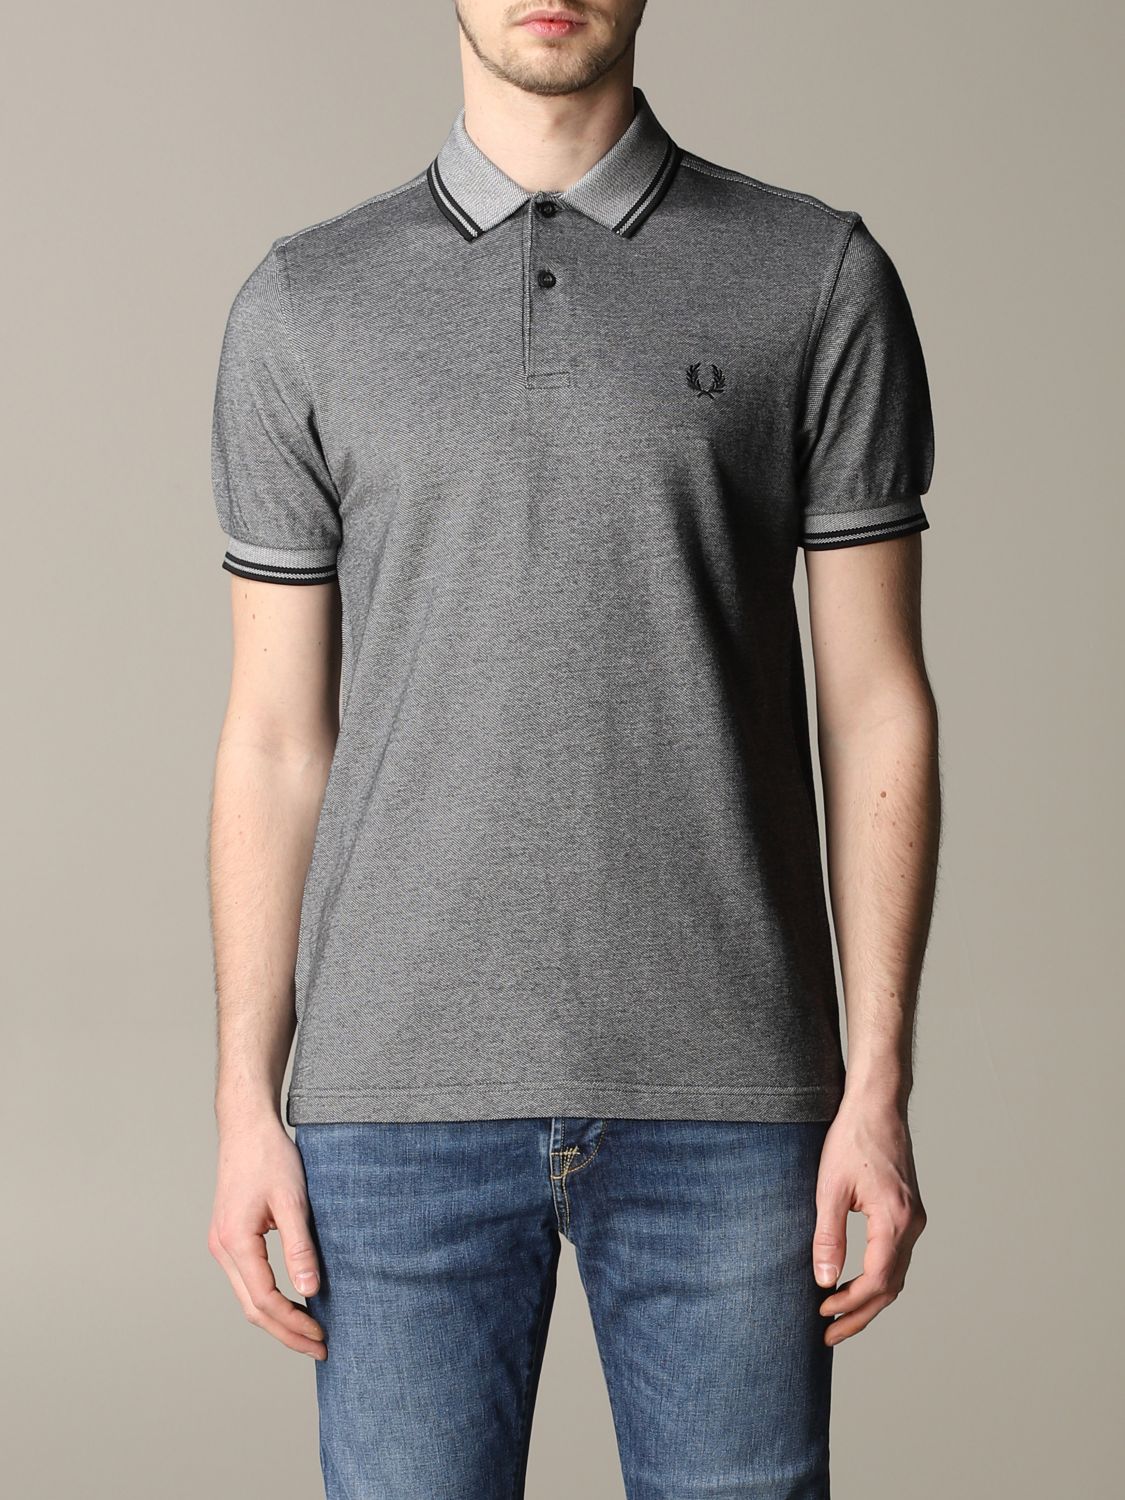 Fred Perry Outlet: polo shirt for man - Black 2 | Fred Perry polo shirt ...